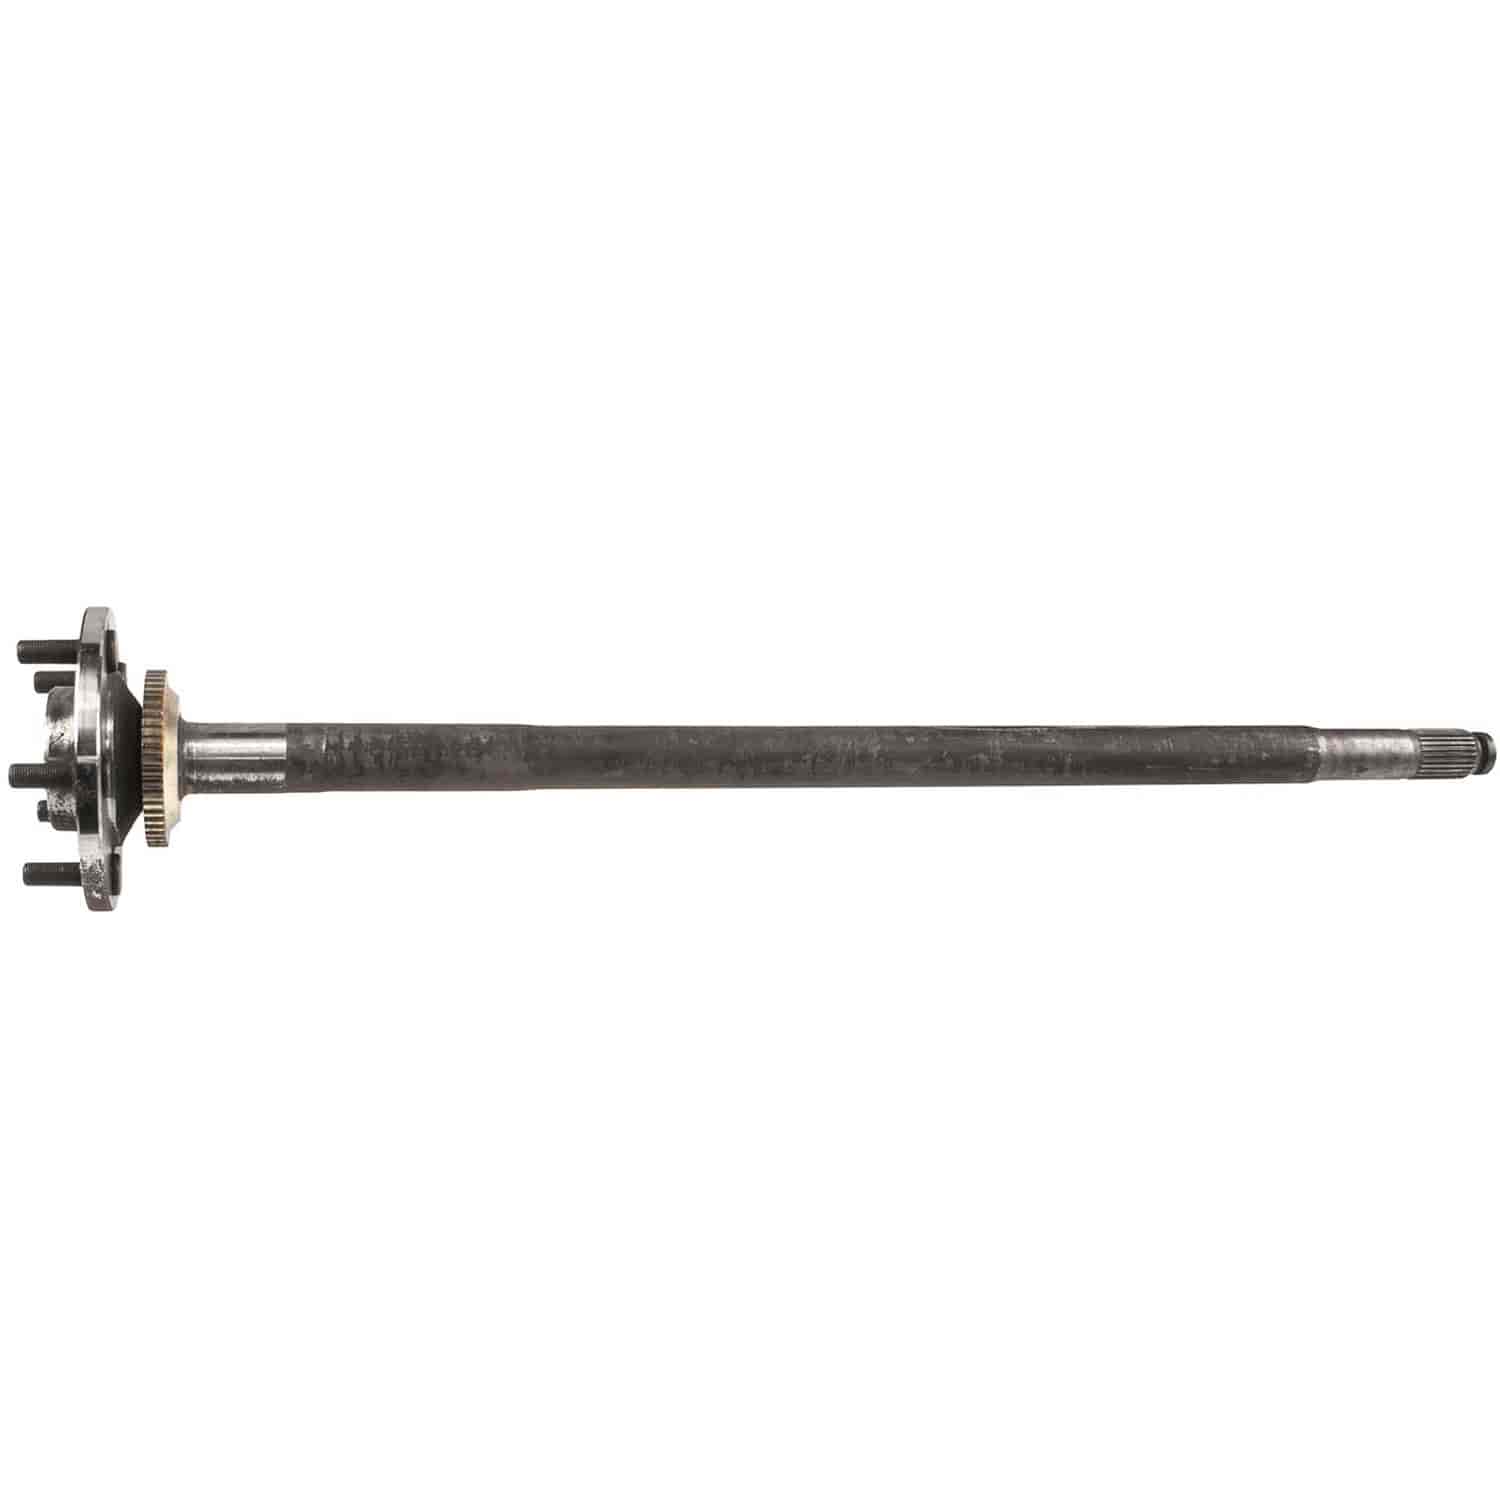 Axle Shaft 31.22 in. Overall Length 5 Lugs